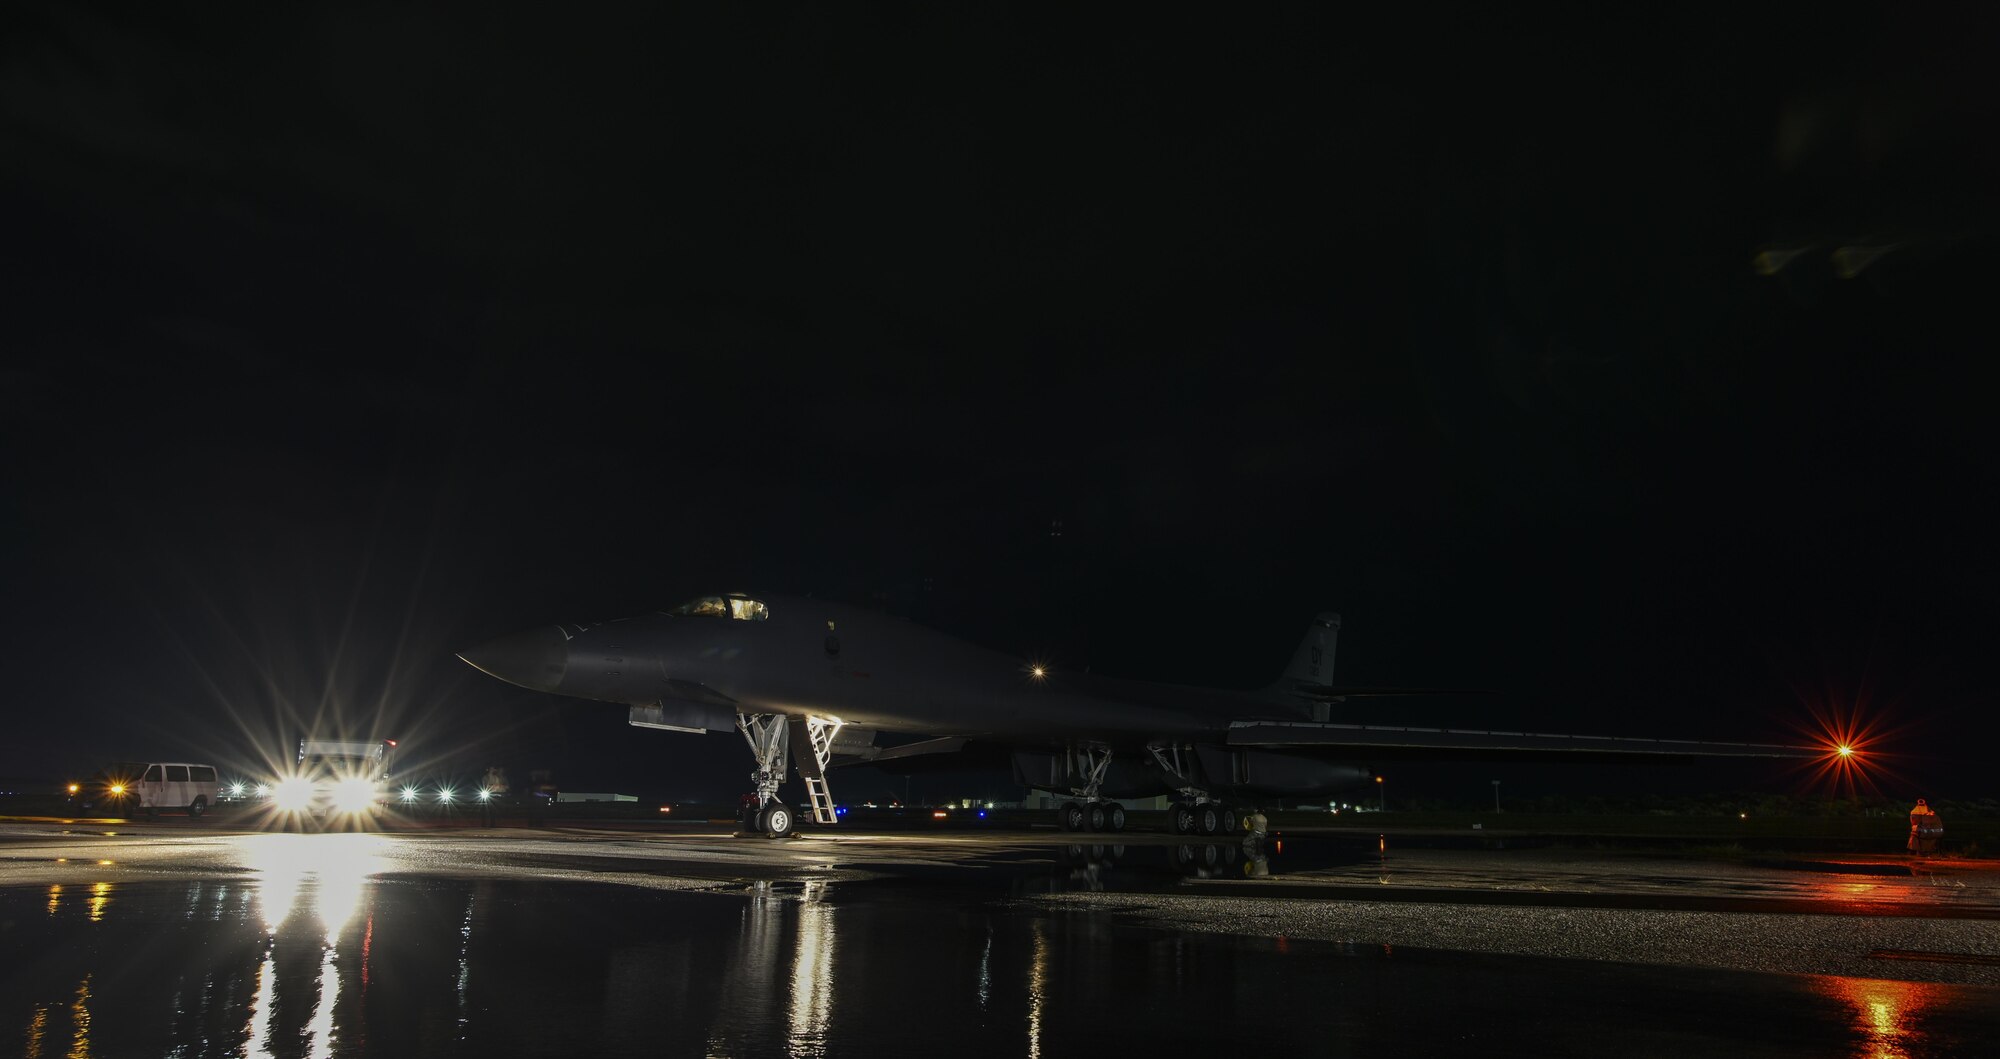 A U.S. Air Force B-1B Lancer assigned to the 9th Expeditionary Bomb Squadron, deployed from Dyess Air Force Base, Texas, prepares to take off for a 10-hour mission from Andersen Air Force Base, Guam, into Japanese airspace and over the Korean Peninsula, July 30, 2017. The B-1s first made contact with Japan Air Self-Defense Force F-2 fighter jets in Japanese airspace, then proceeded over the Korean Peninsula and were joined by South Korean F-15 fighter jets. The aircrews practiced intercept and formation training during the mission, enabling them to improve their combined capabilities and tactical skills, while also strengthening the long standing military-to-military relationships in the Indo-Asia-Pacific. (U.S. Air Force photo/Tech. Sgt. Richard P. Ebensberger)